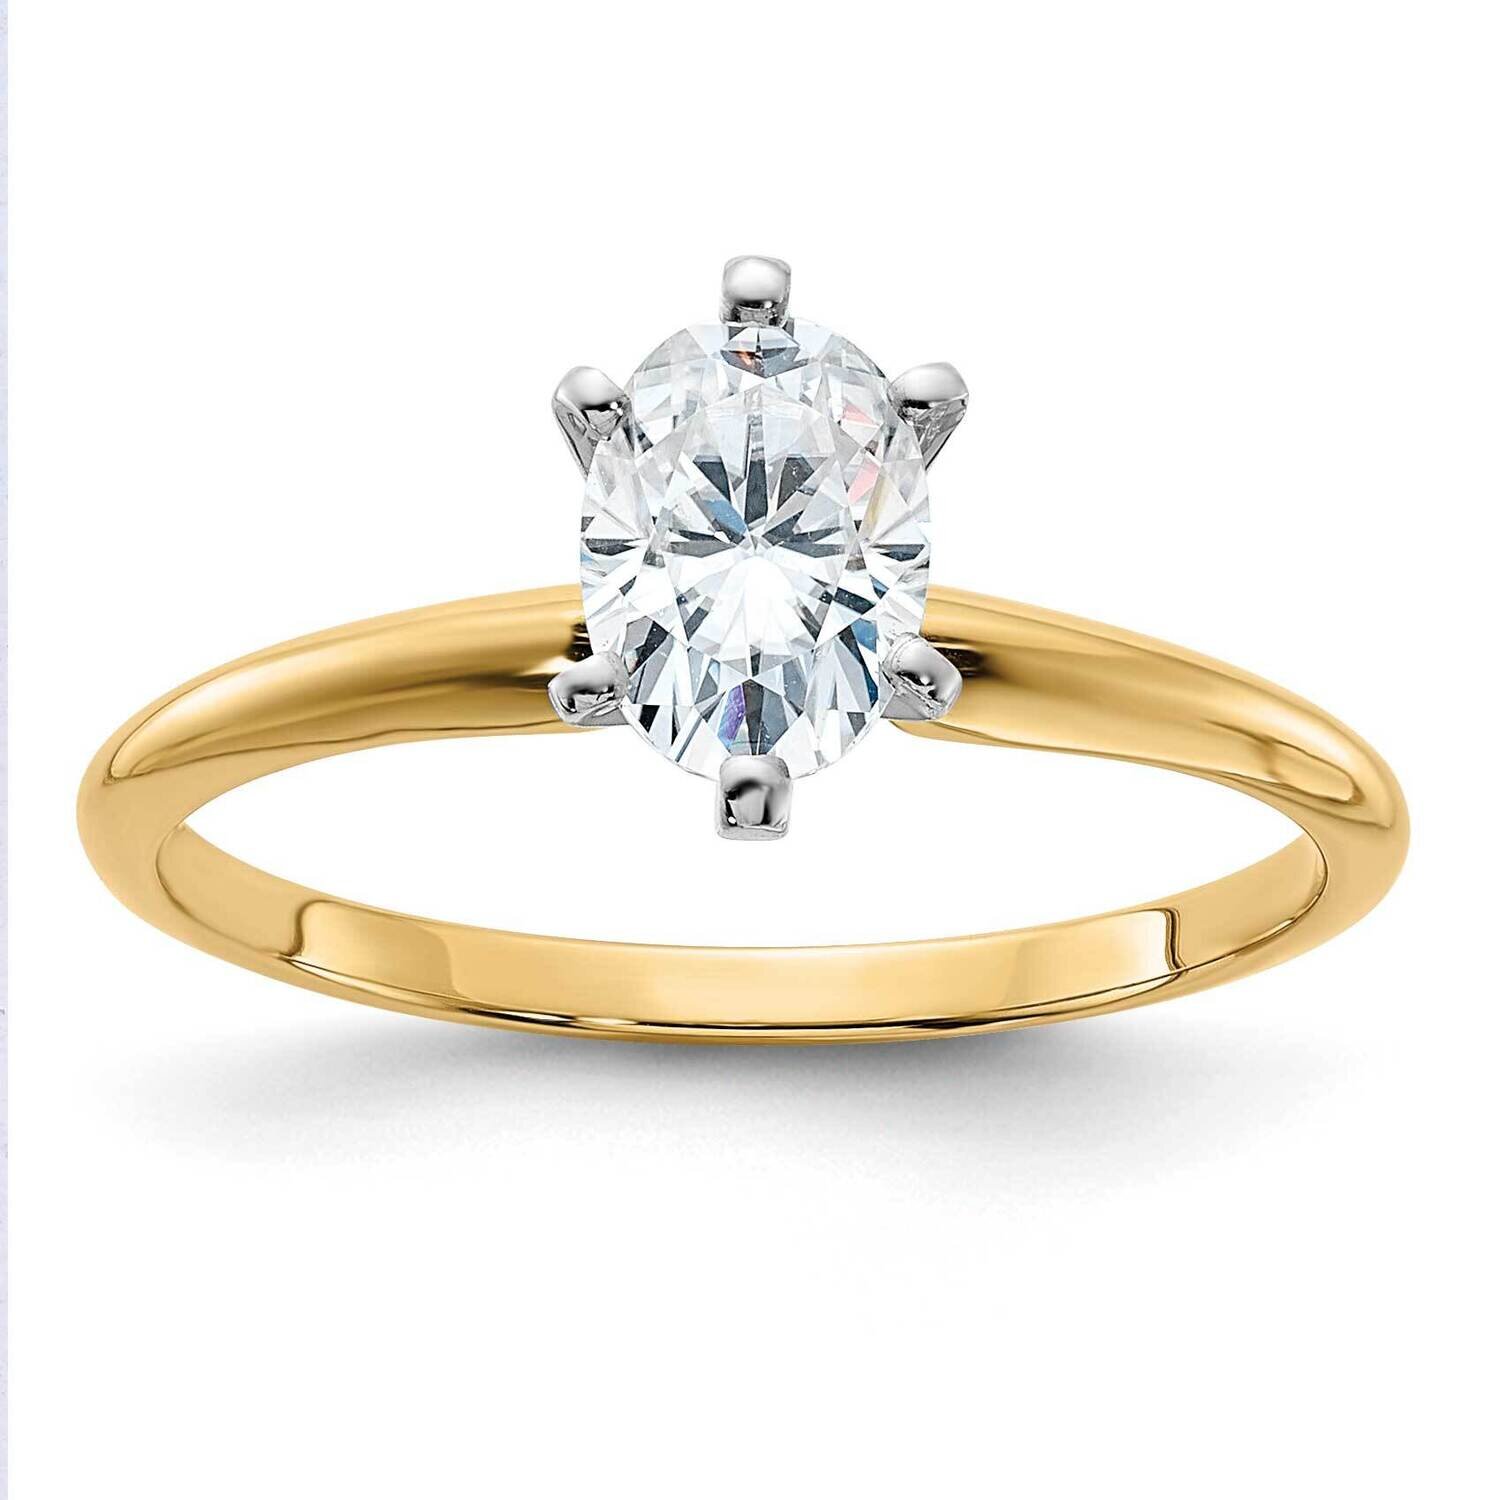 7/8ct. D E F Pure Light Oval Moissanite Solitaire Ring 14k Gold YGSH15O-12MP-7